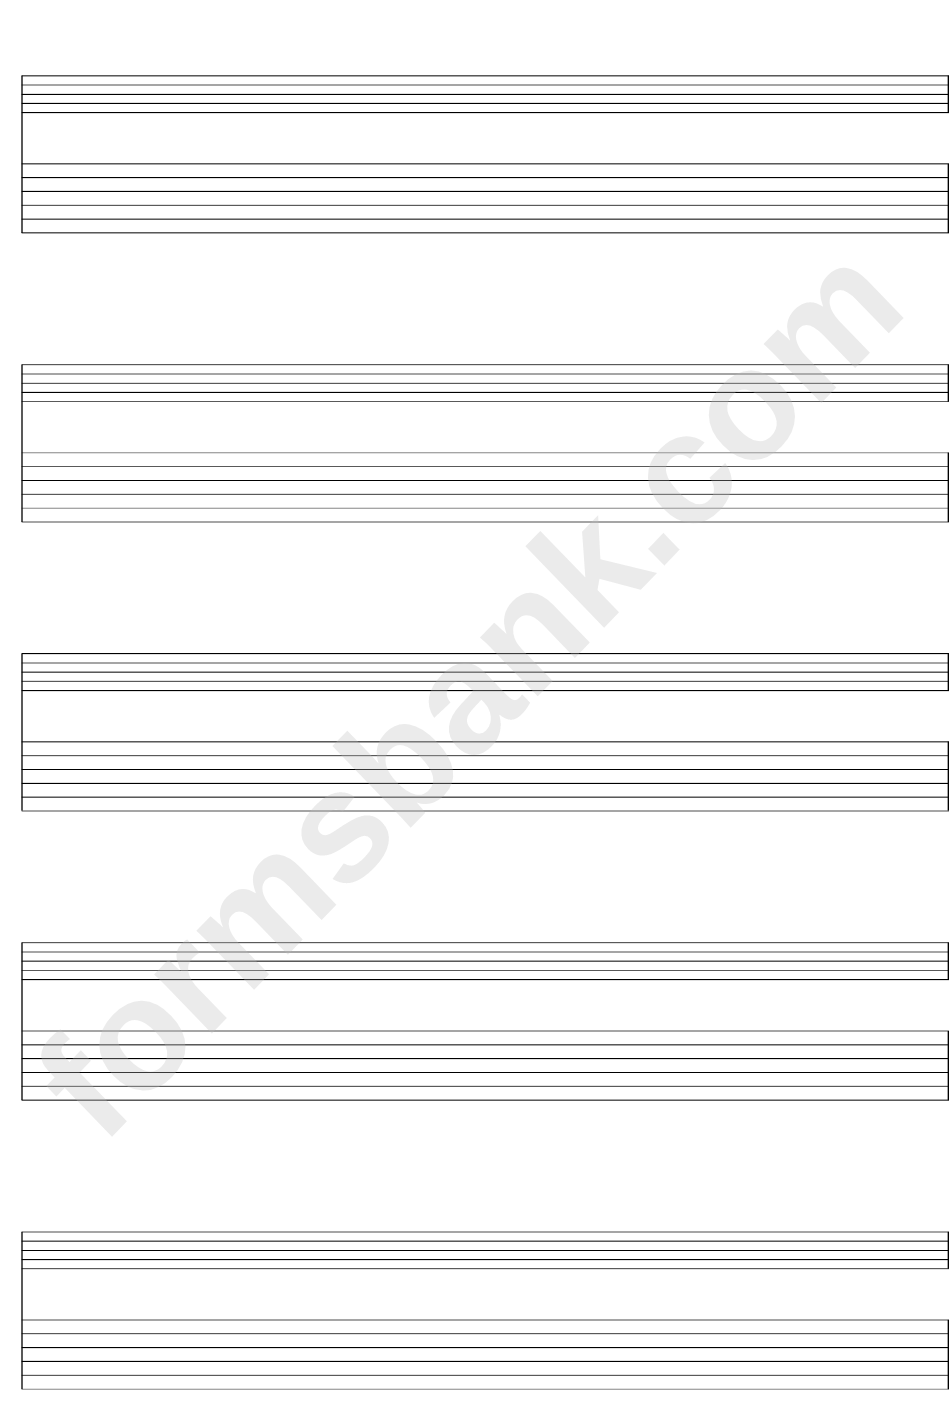 5-Stave Lute Tablature + 1 Solo Instrument Blank Staff Paper